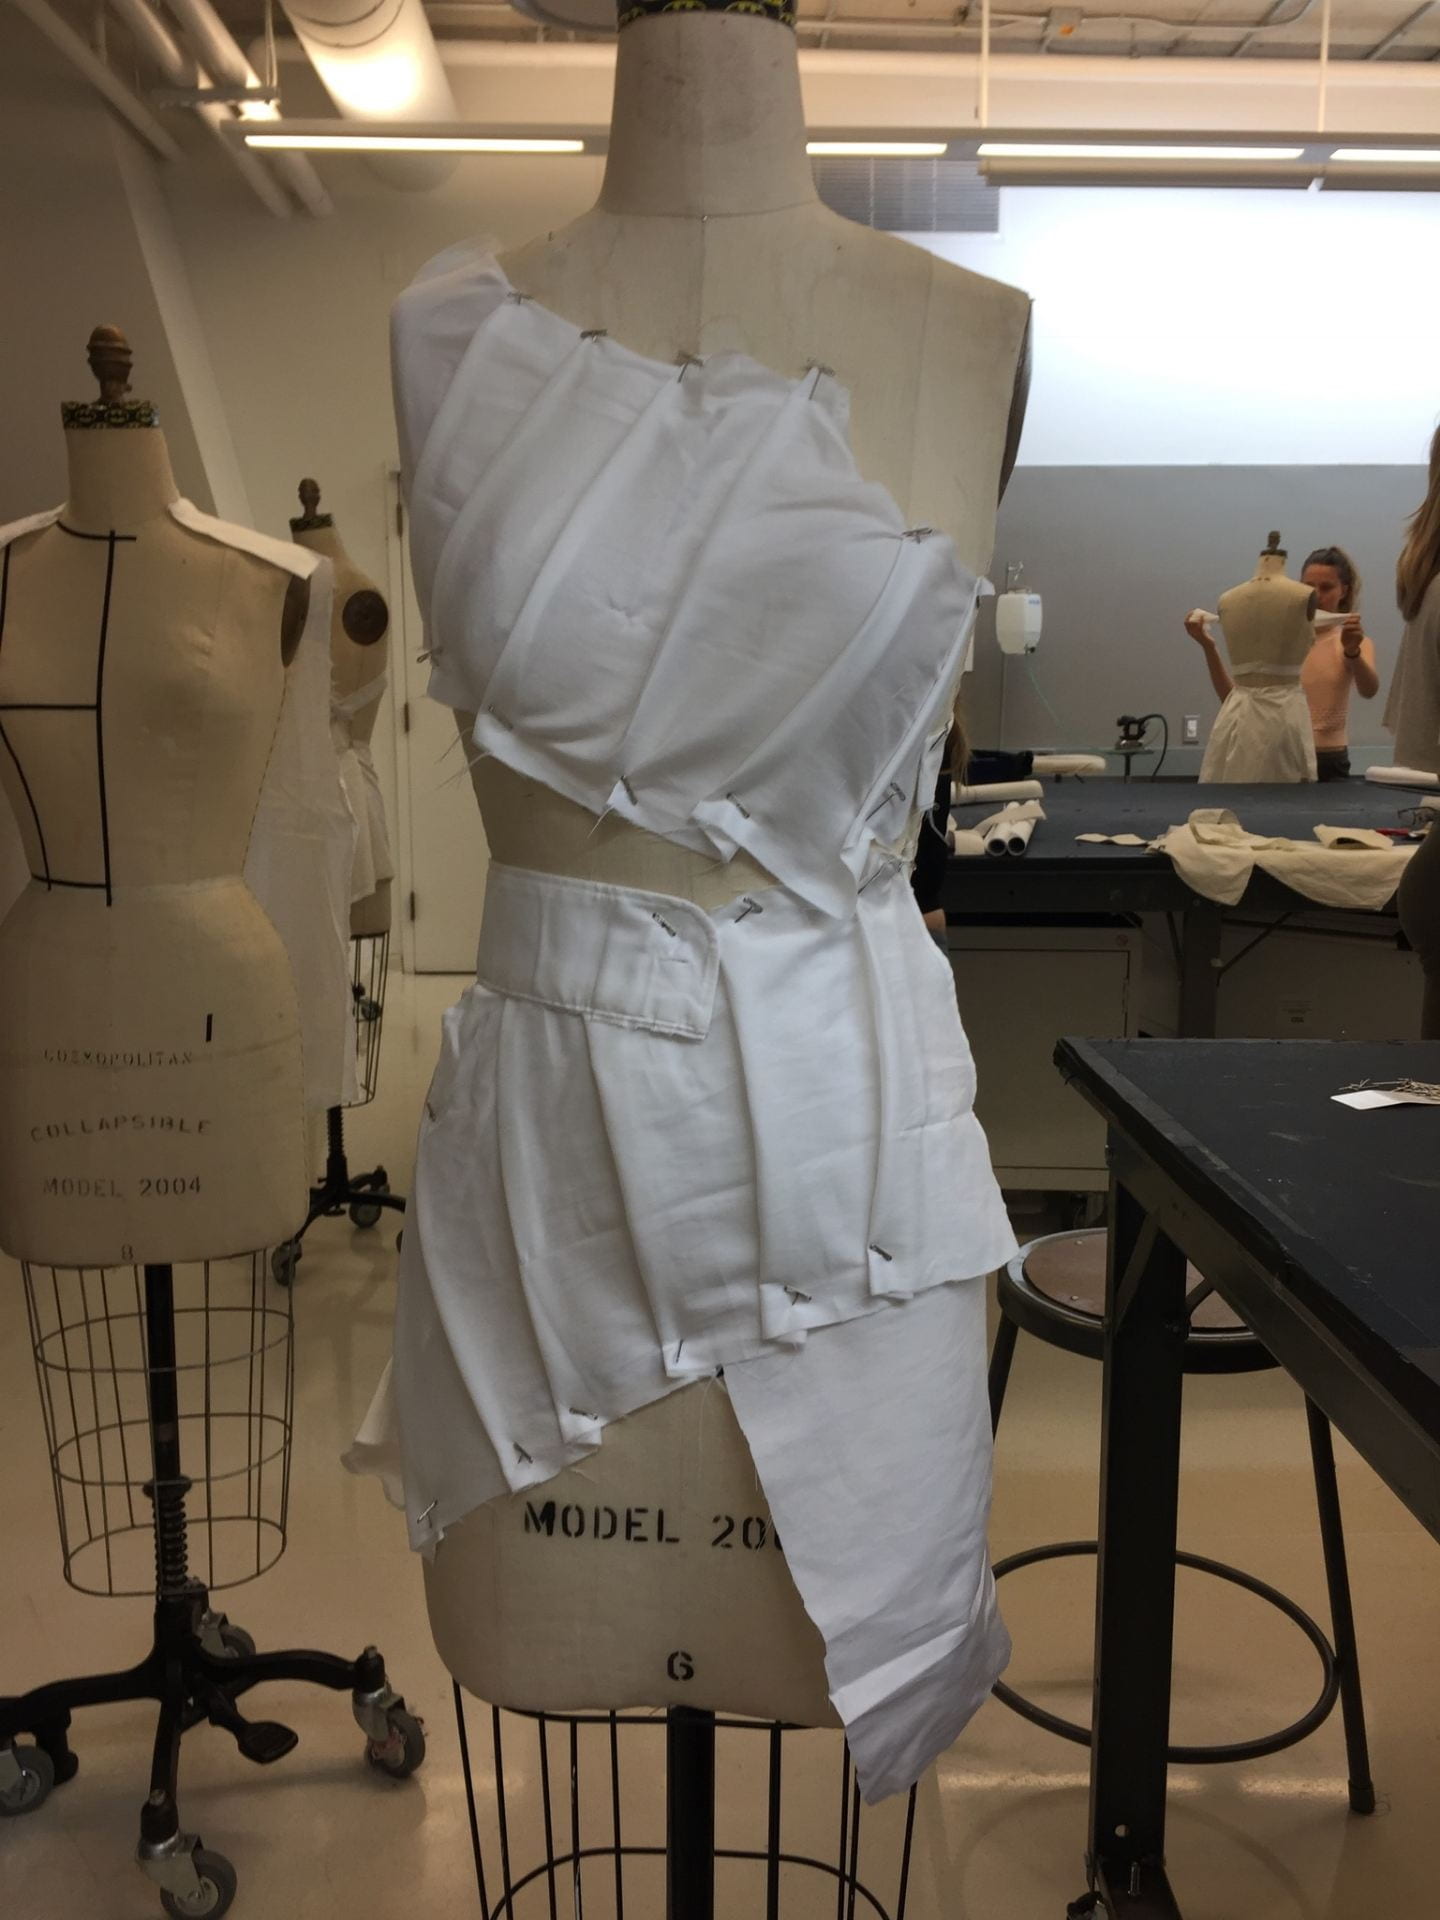 Dress Construction with Fabric